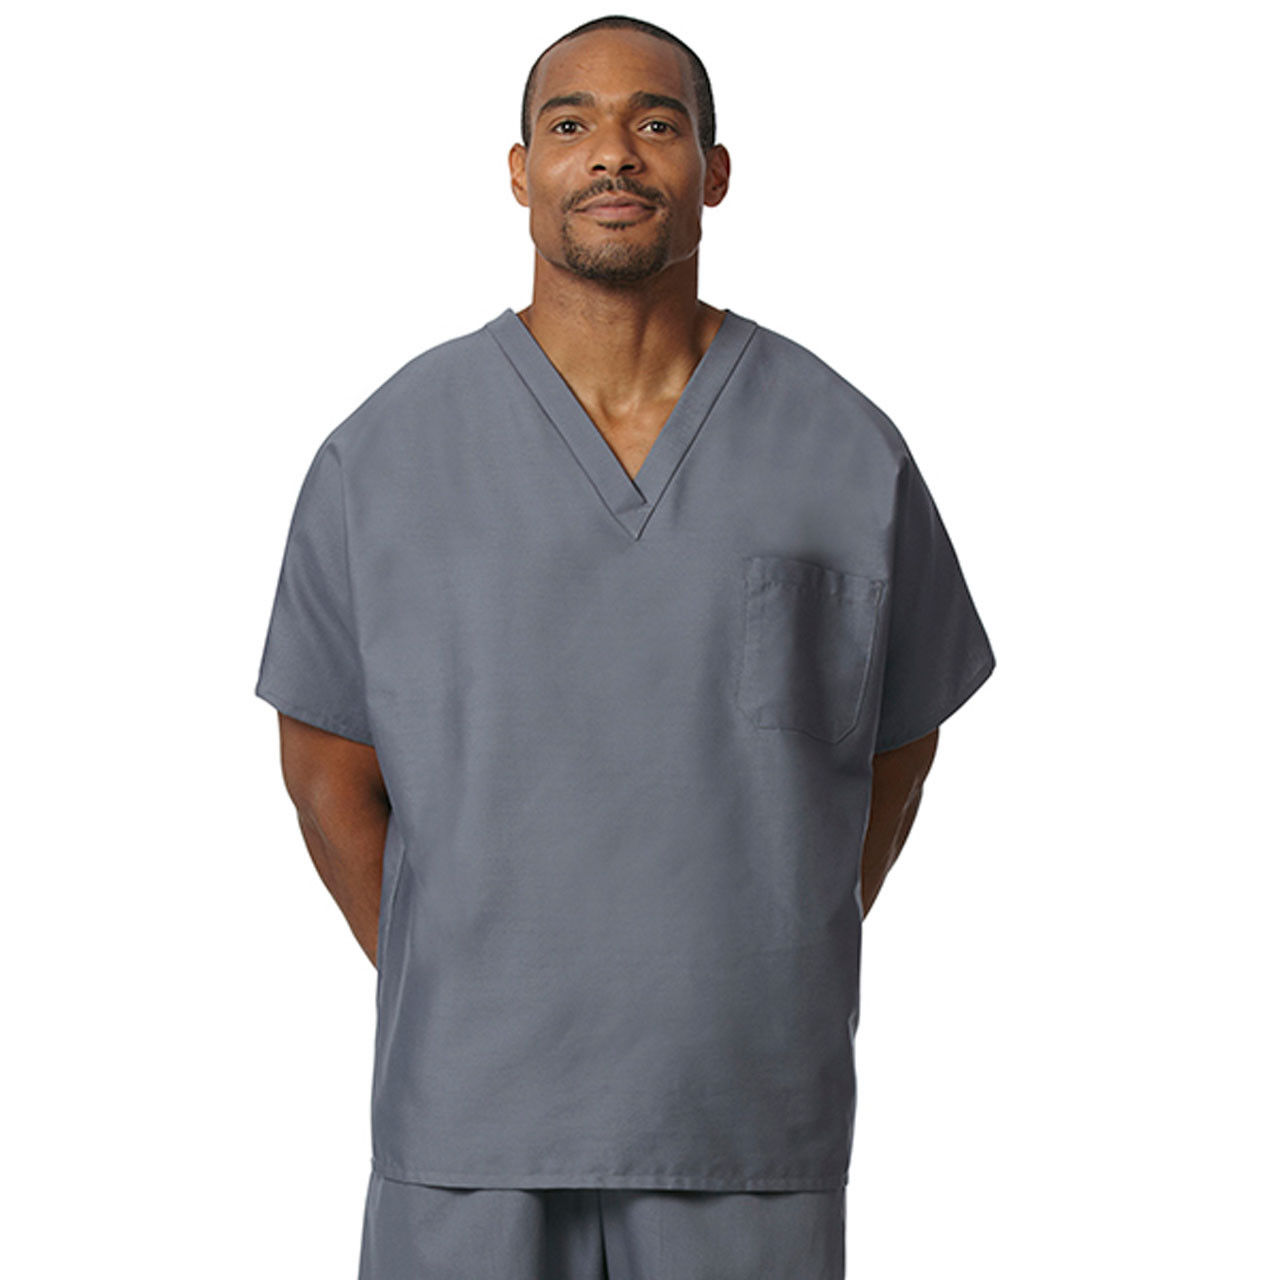 Can I look professional without sacrificing comfort or style in the Womens and Mens Tall Scrub Tops?